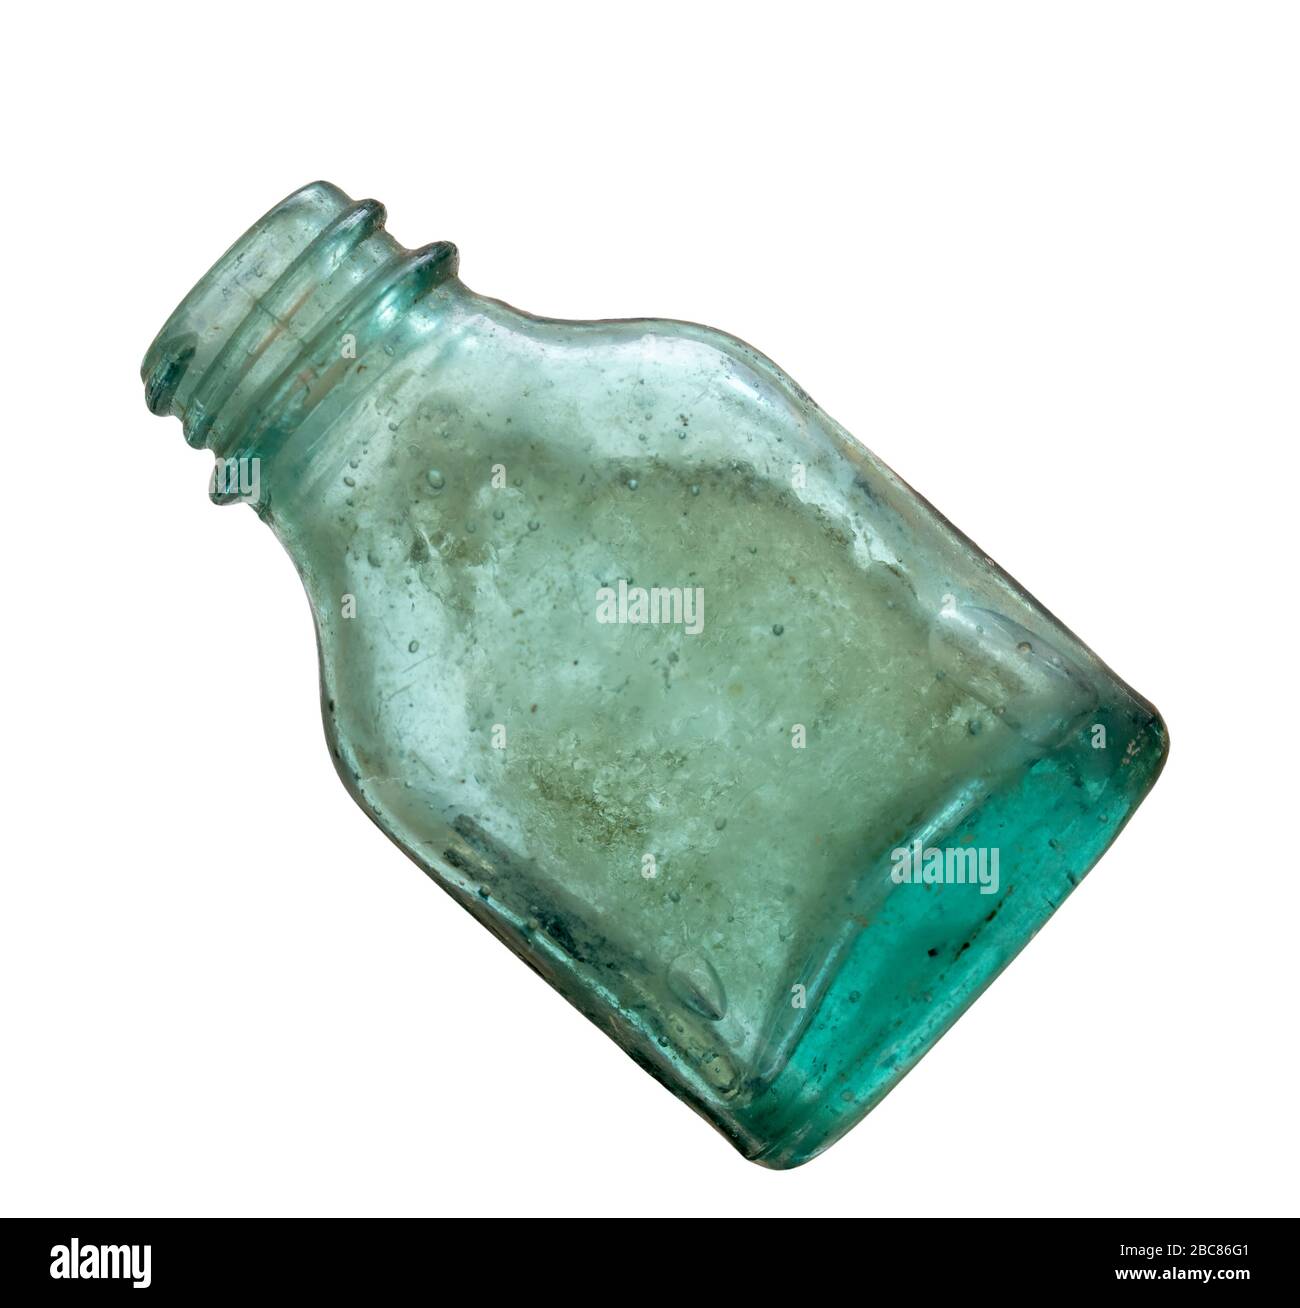 Very old green glass medicine bottle isolated on white. Looks hand blown. Stock Photo